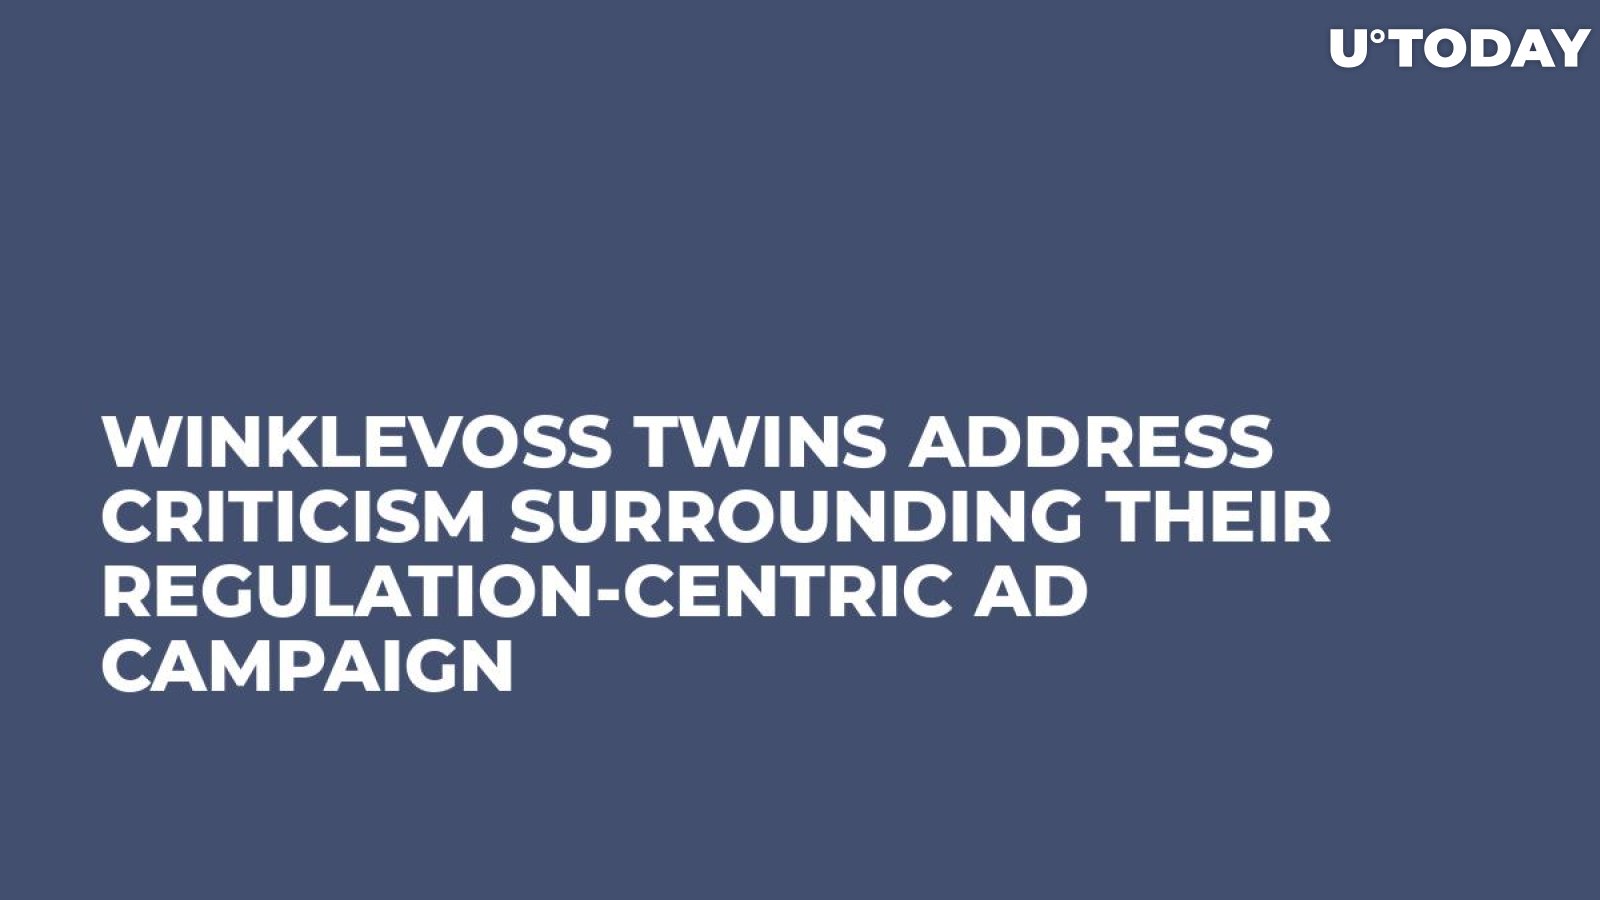 Winklevoss Twins Address Criticism Surrounding Their Regulation-Centric Ad Campaign